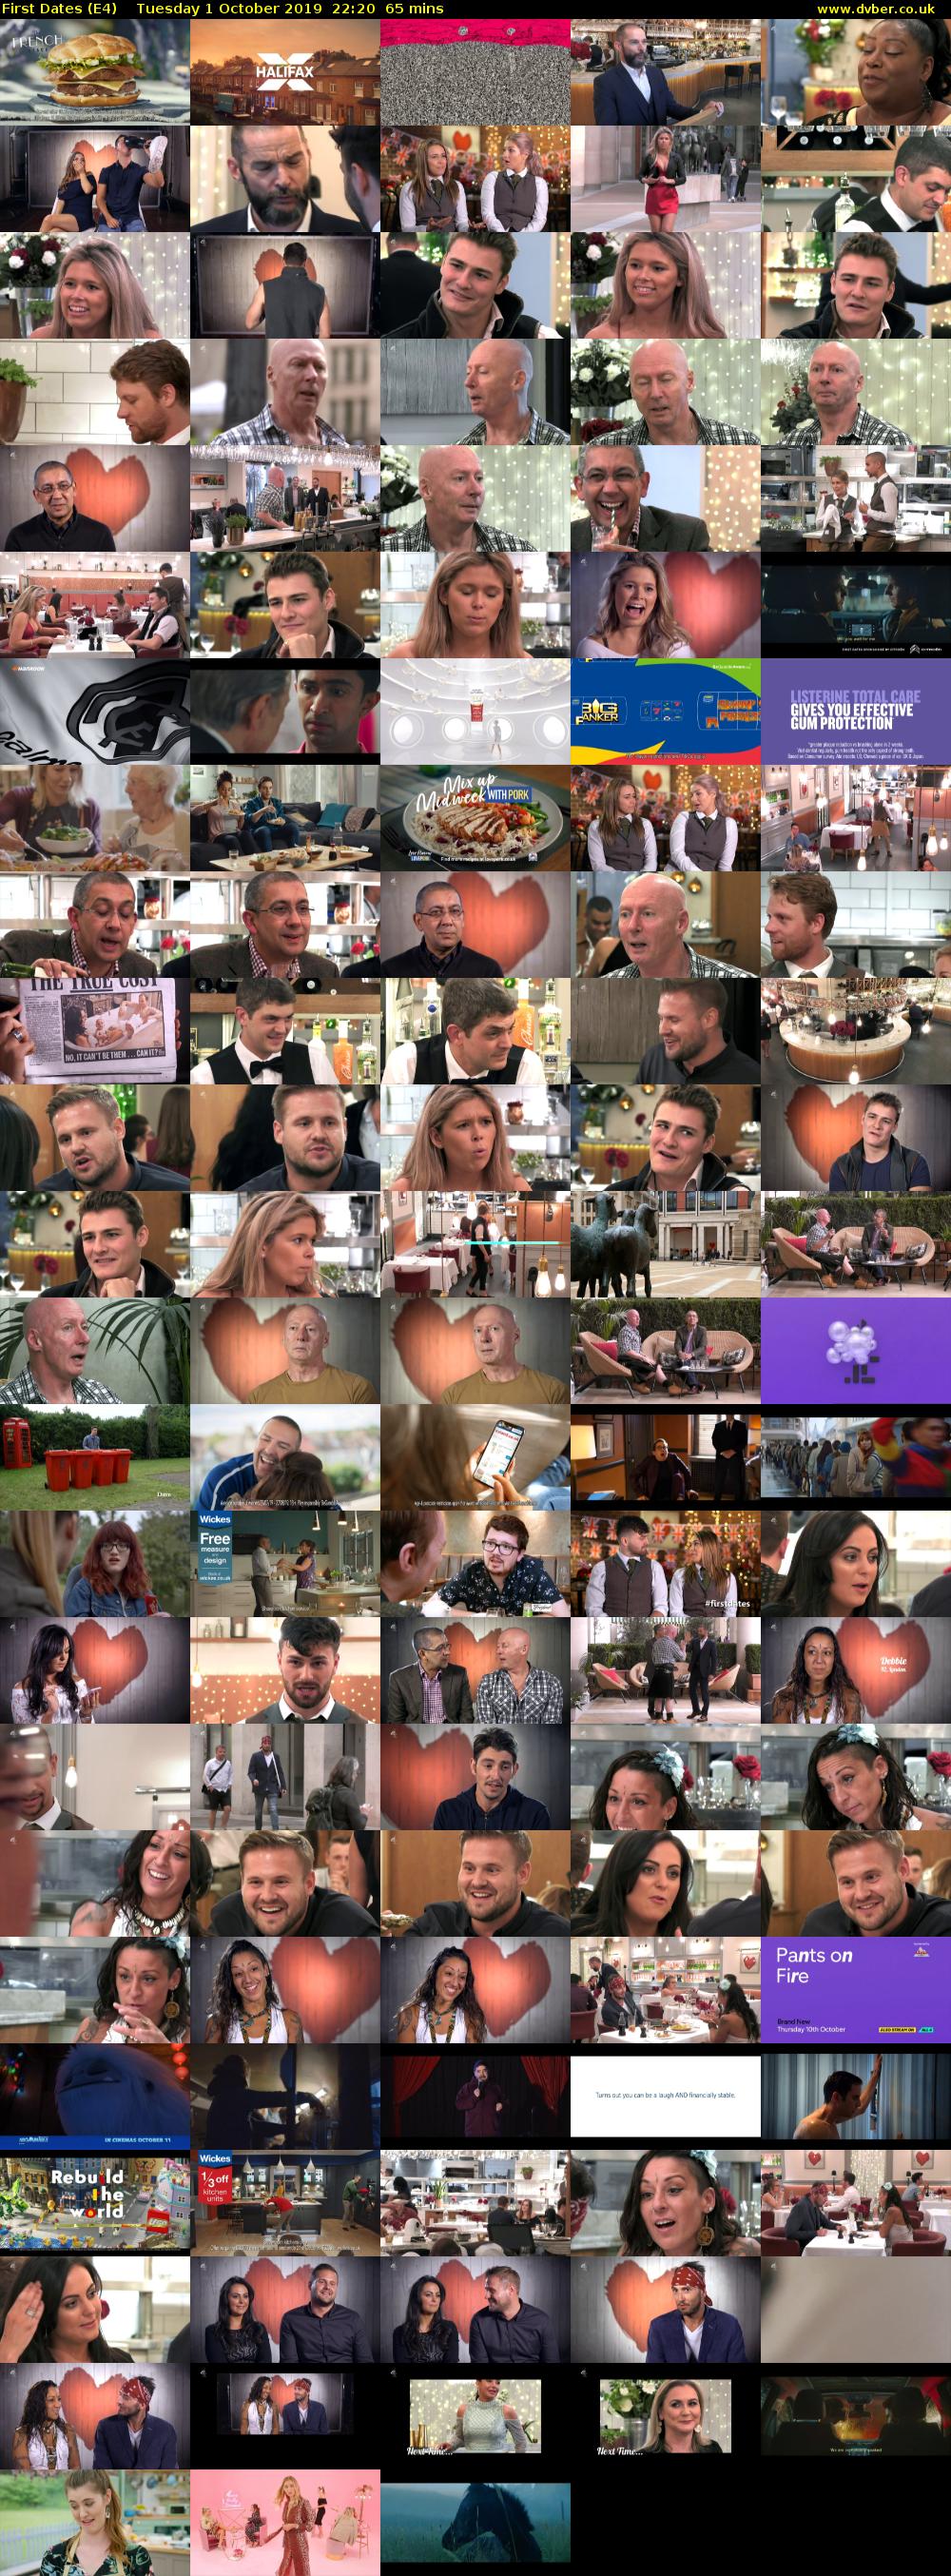 First Dates (E4) Tuesday 1 October 2019 22:20 - 23:25